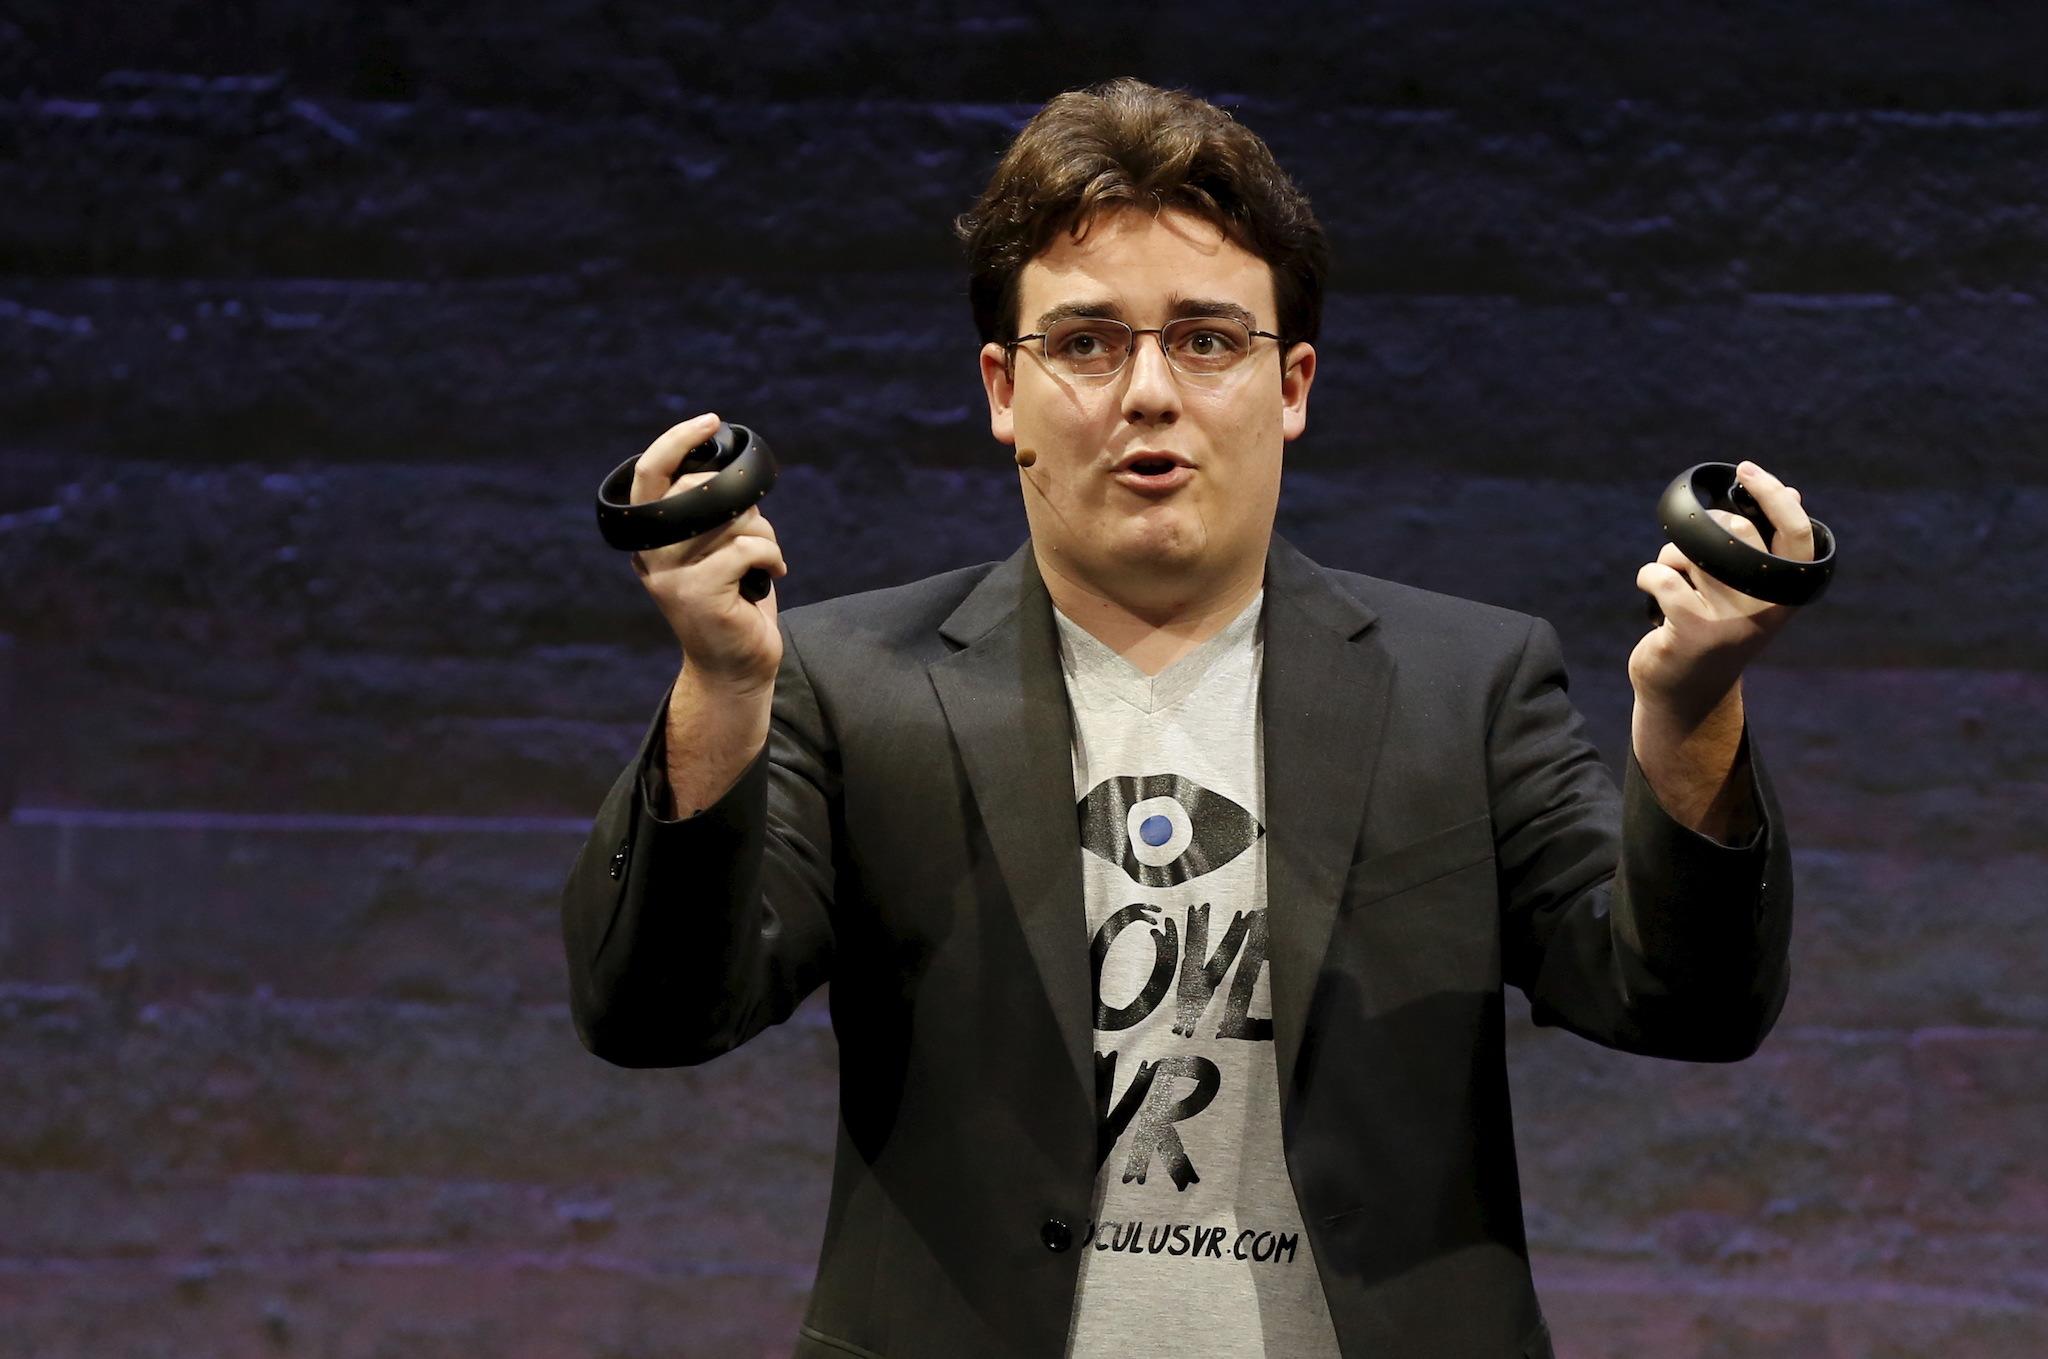 Oculus Founder Palmer Luckey displays an Oculus Touch input during an event in San Francisco, California June 11, 2015